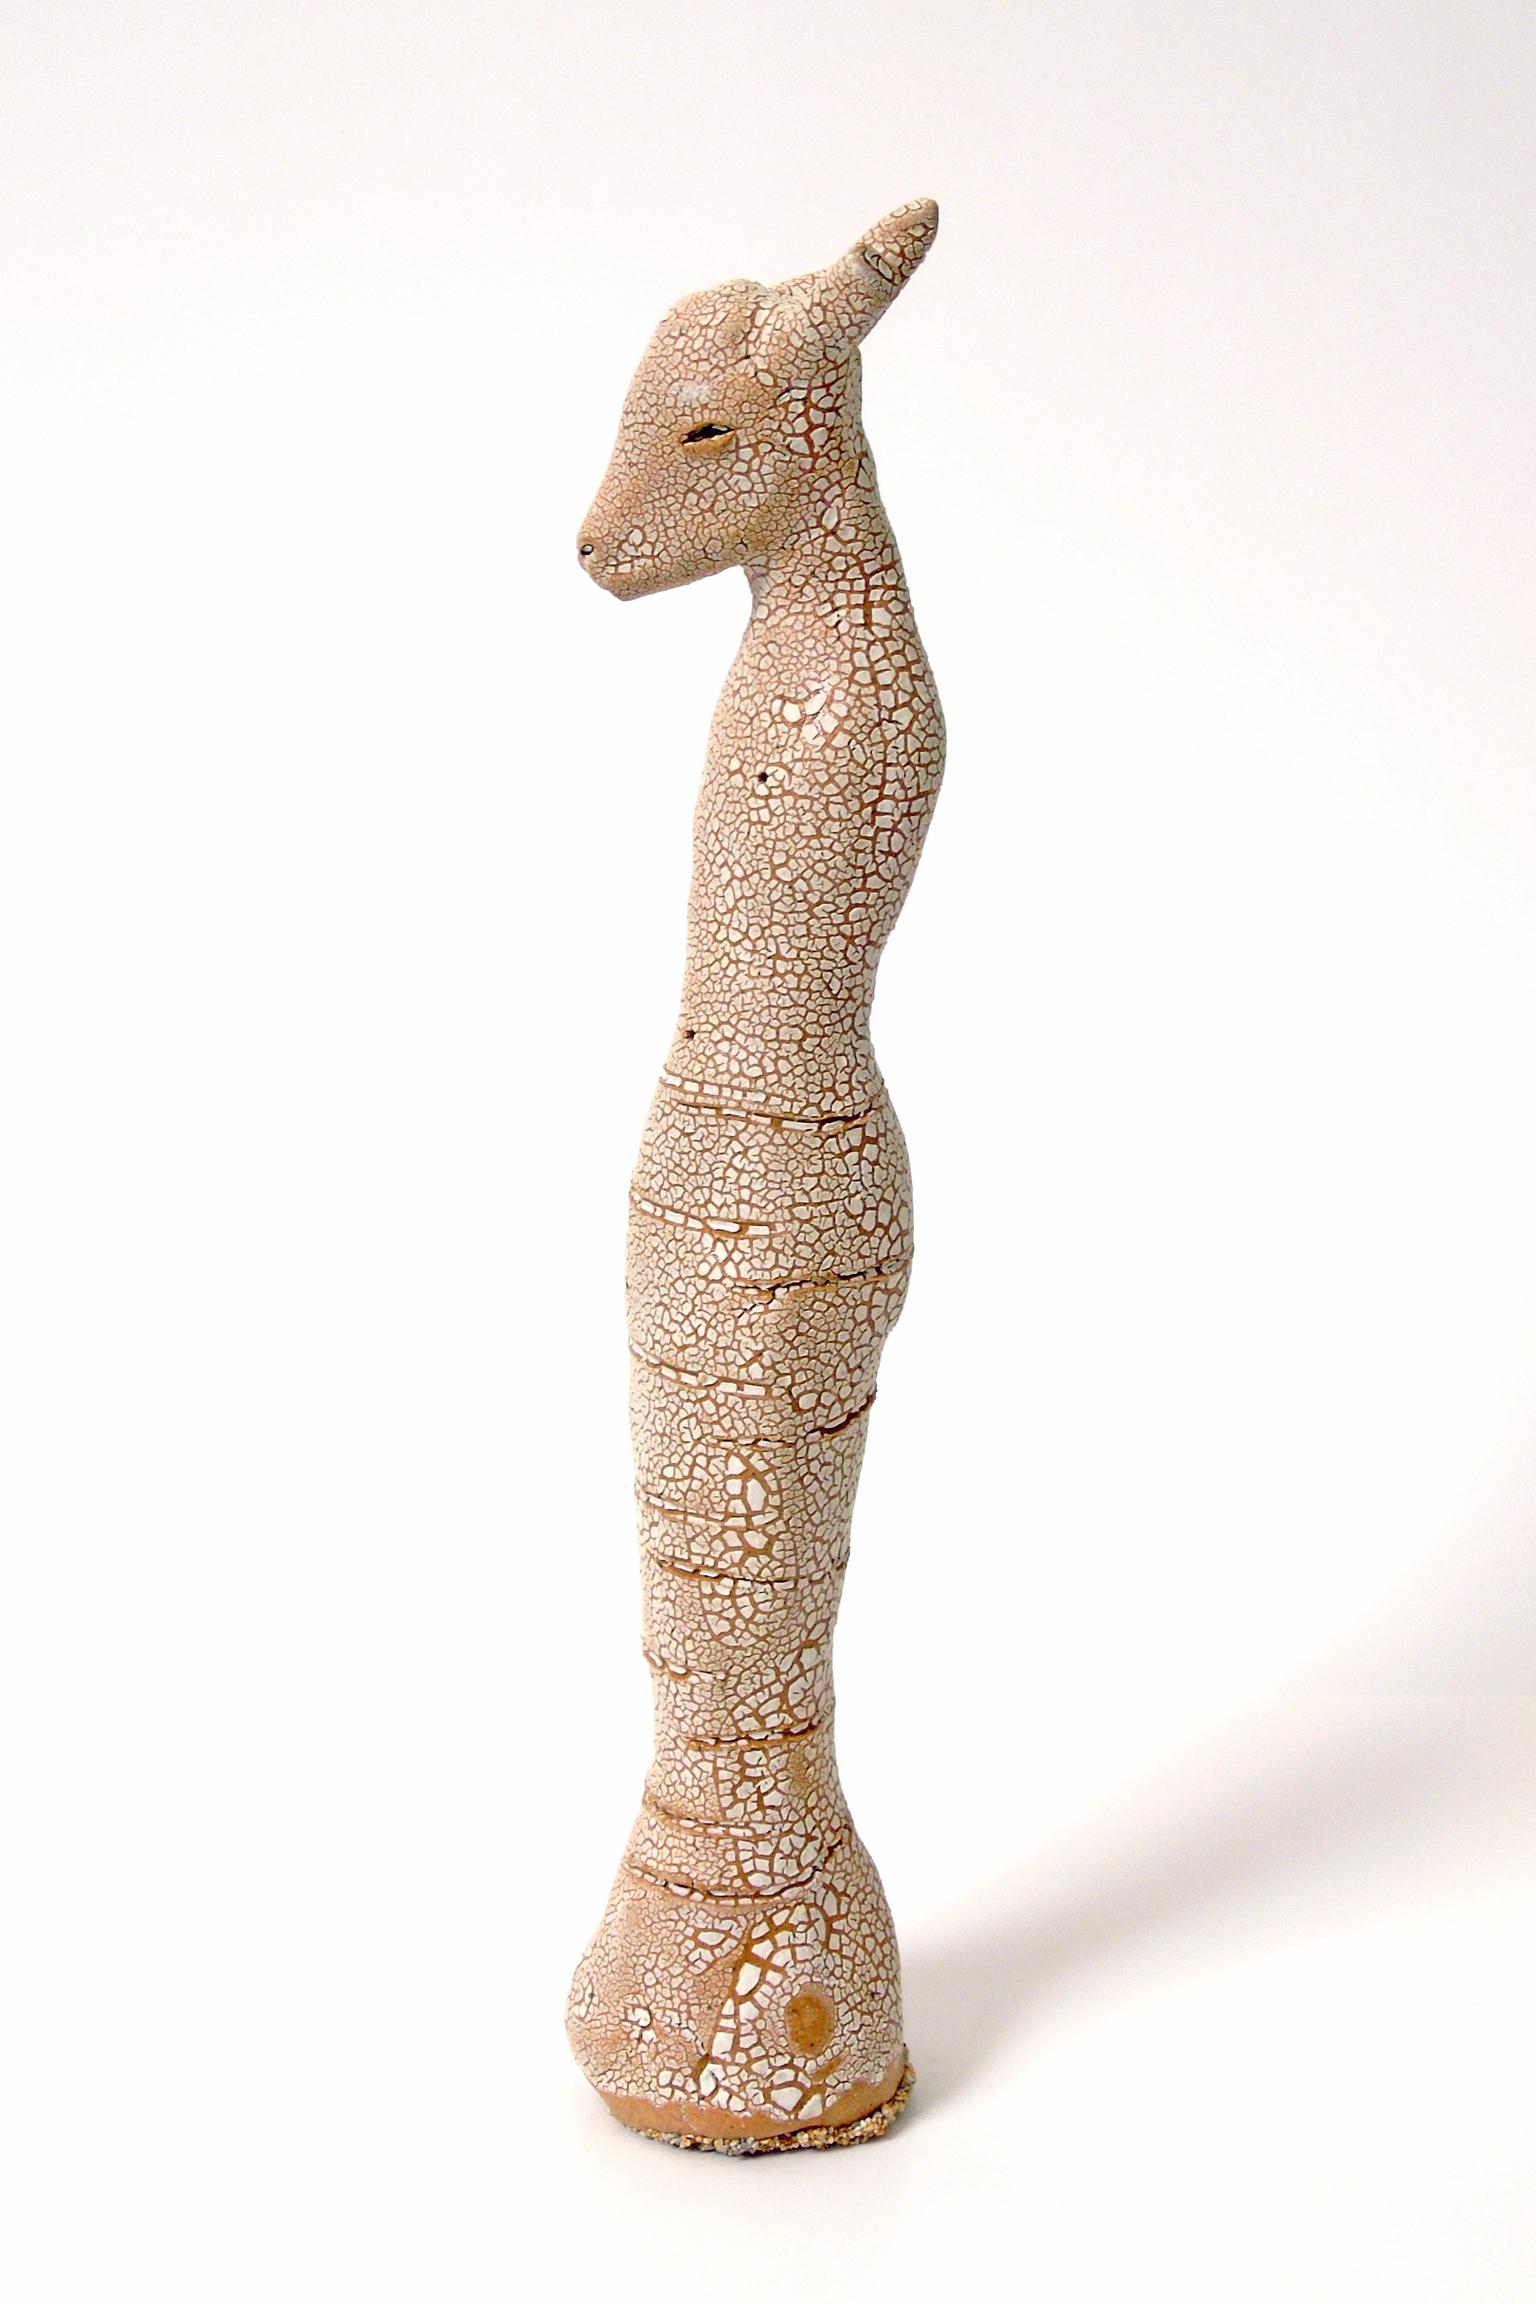 Tiny Goat Totem -106 - Contemporary Sculpture by Robin Whiteman